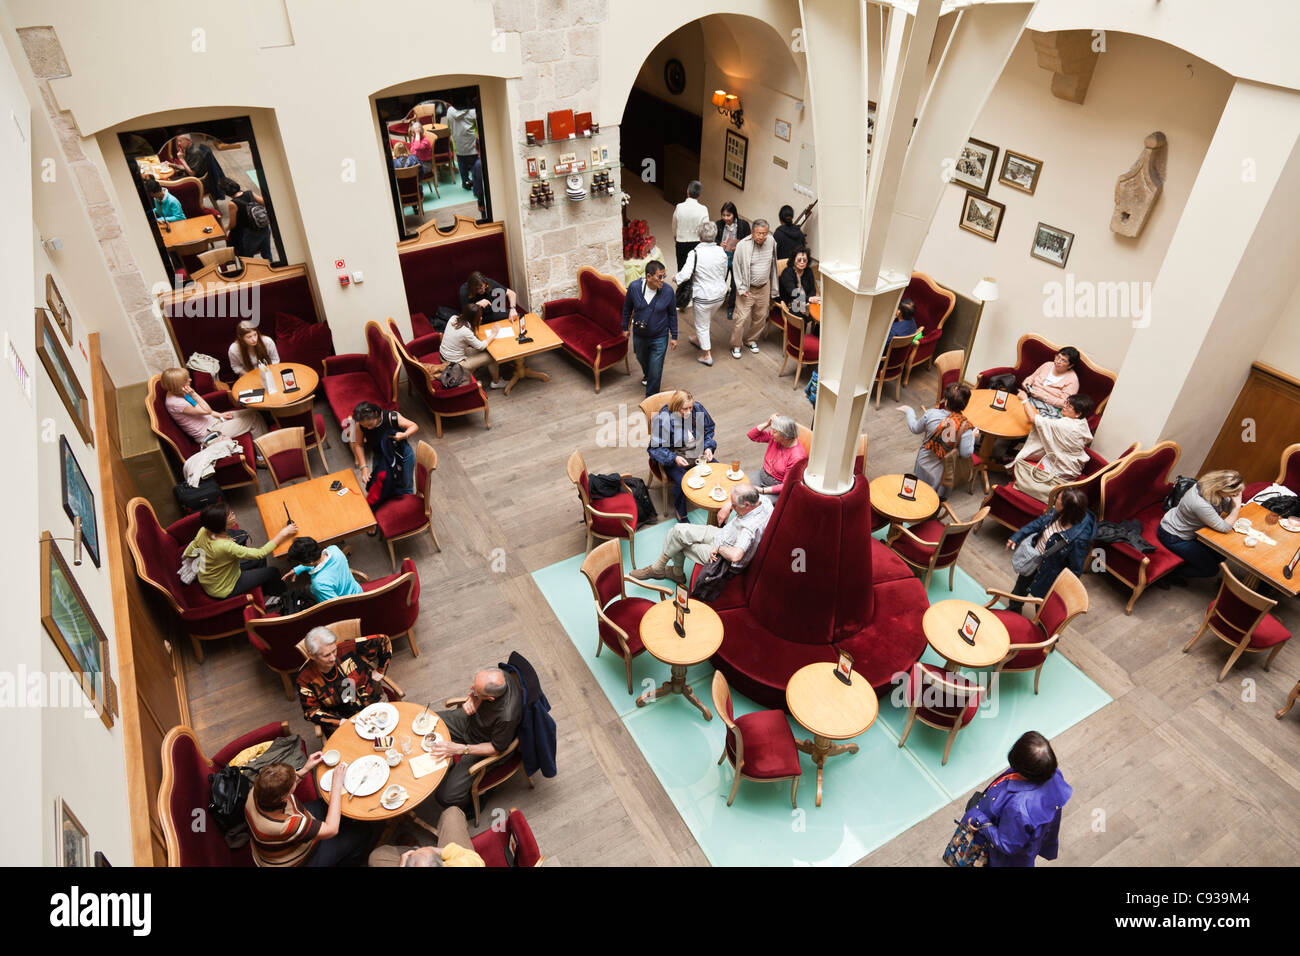 Poland, Cracow. The interior of Wedel chocolate shop and cafe. Stock Photo